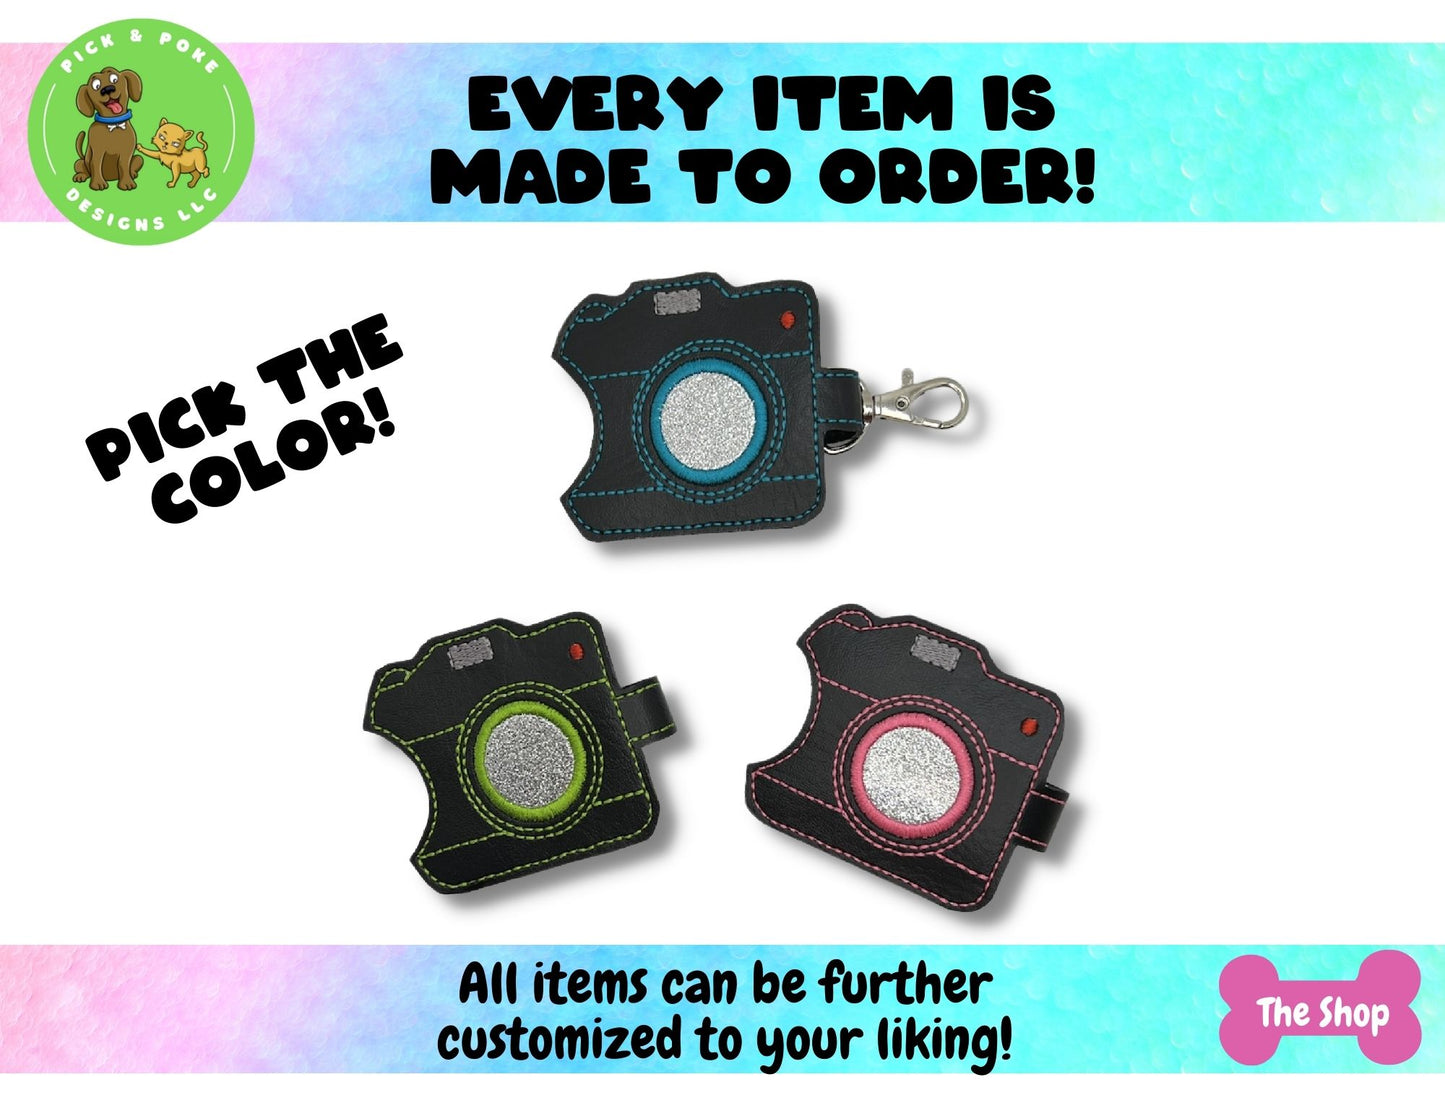 Retro camera keychains are made to order and colors can be customized